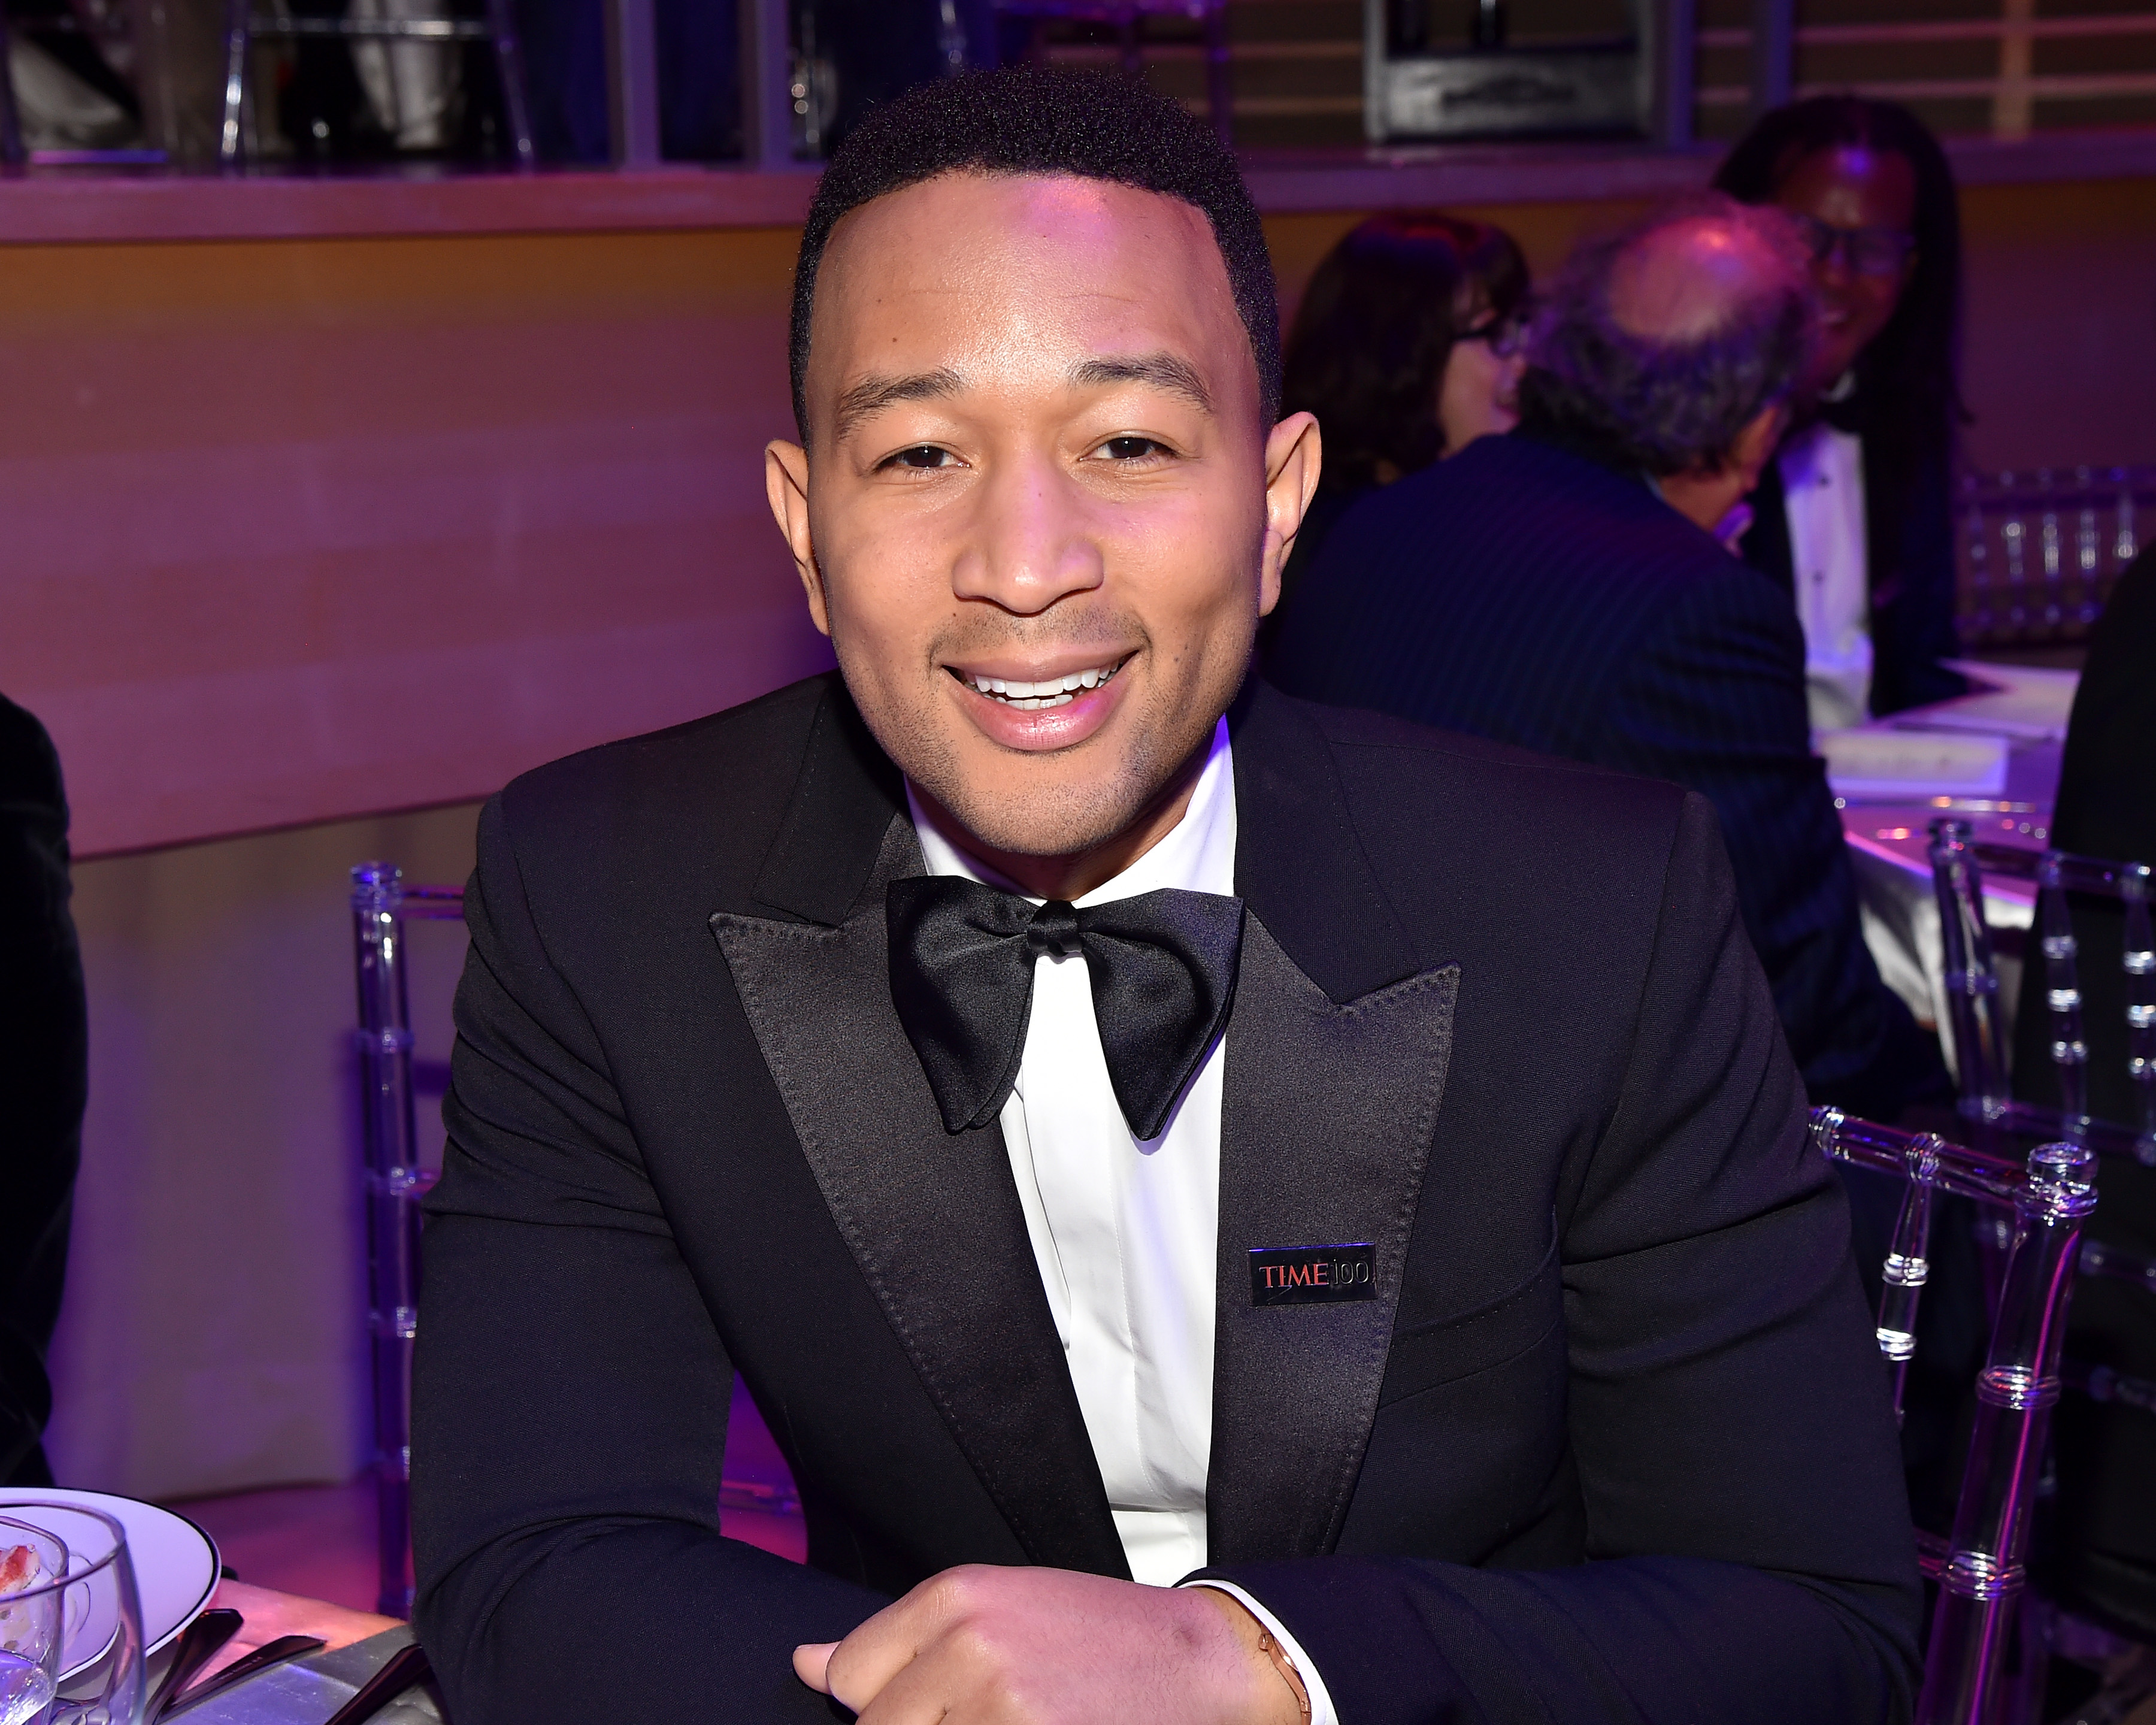 John Legend attends the 2017 TIME 100 Gala at Jazz at Lincoln Center on April 25, 2017 in New York City. (Patrick McMullan—Patrick McMullan via Getty Images)